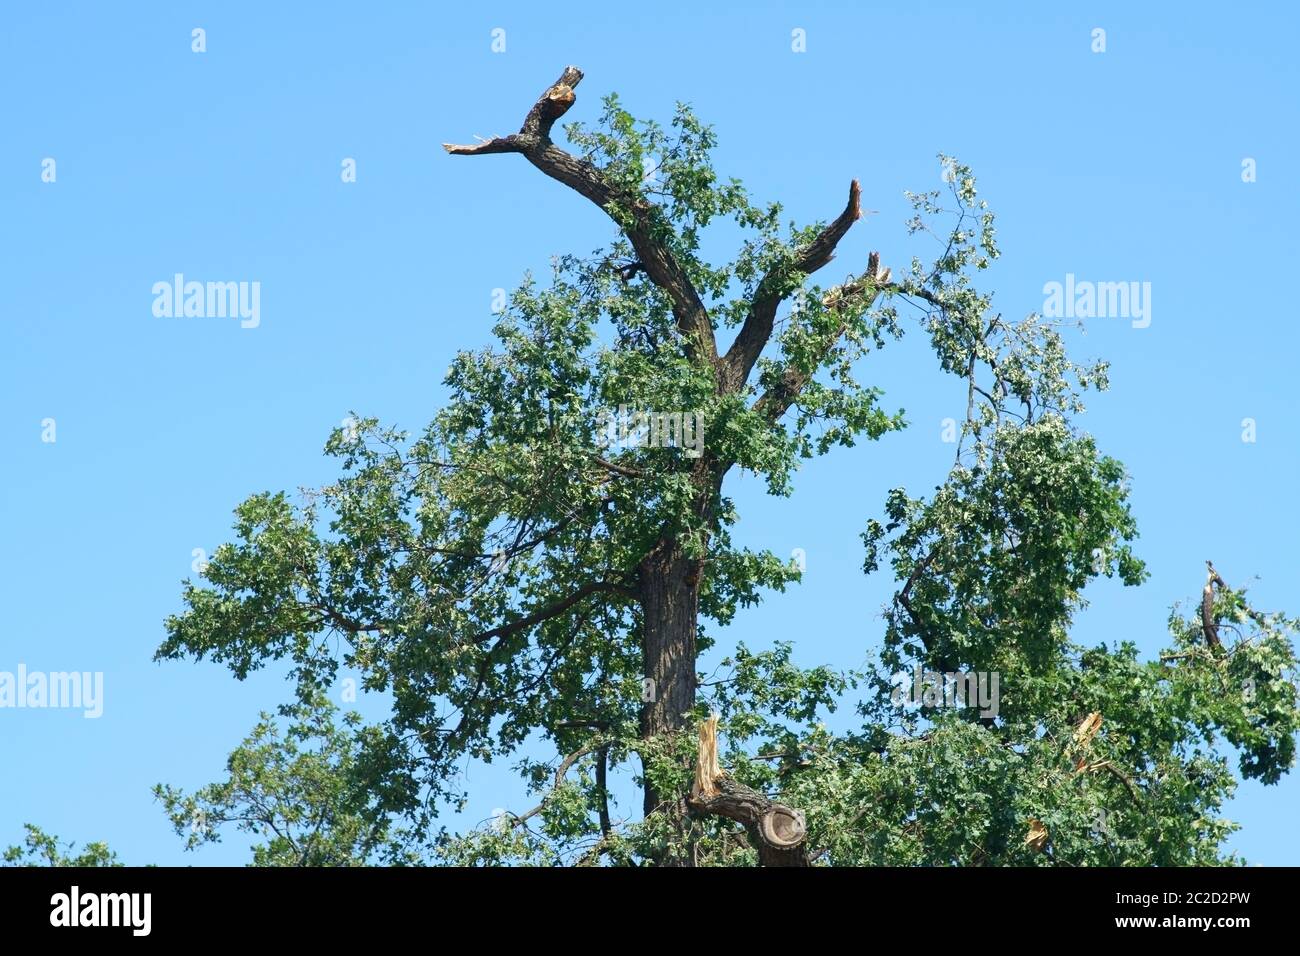 The treetop of an oak with sawn branches after a storm. Stock Photo